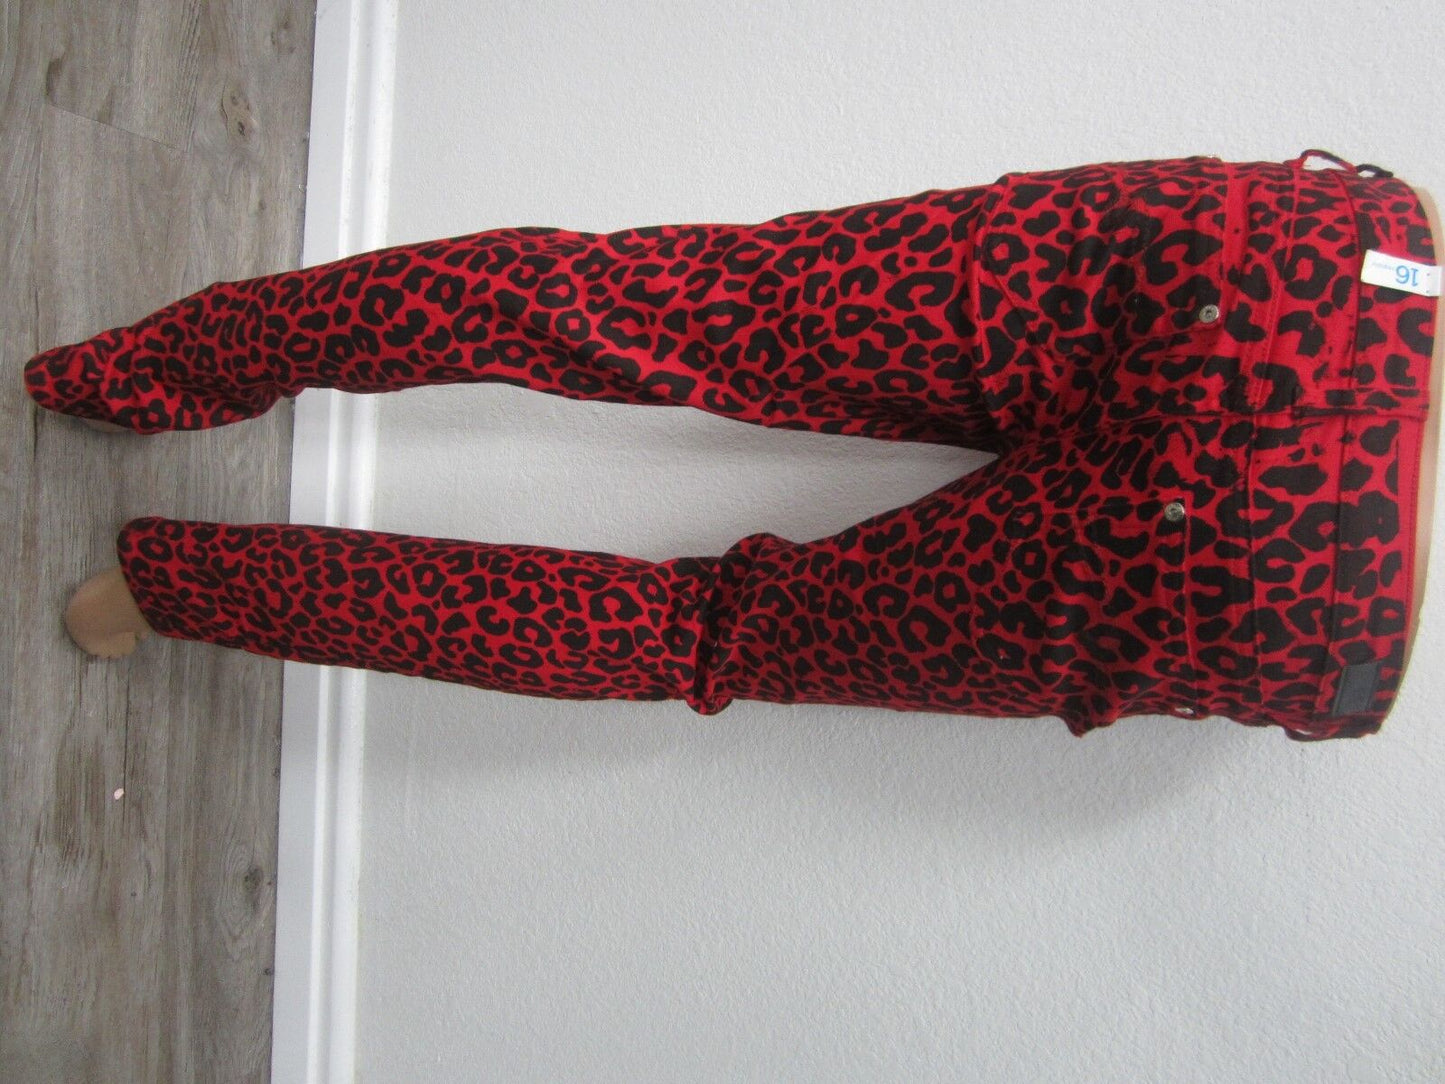 NWT  Justice Girls Premium Red/Blk  Jeans Low Rise Super Skinny Size 16R x 30.5"